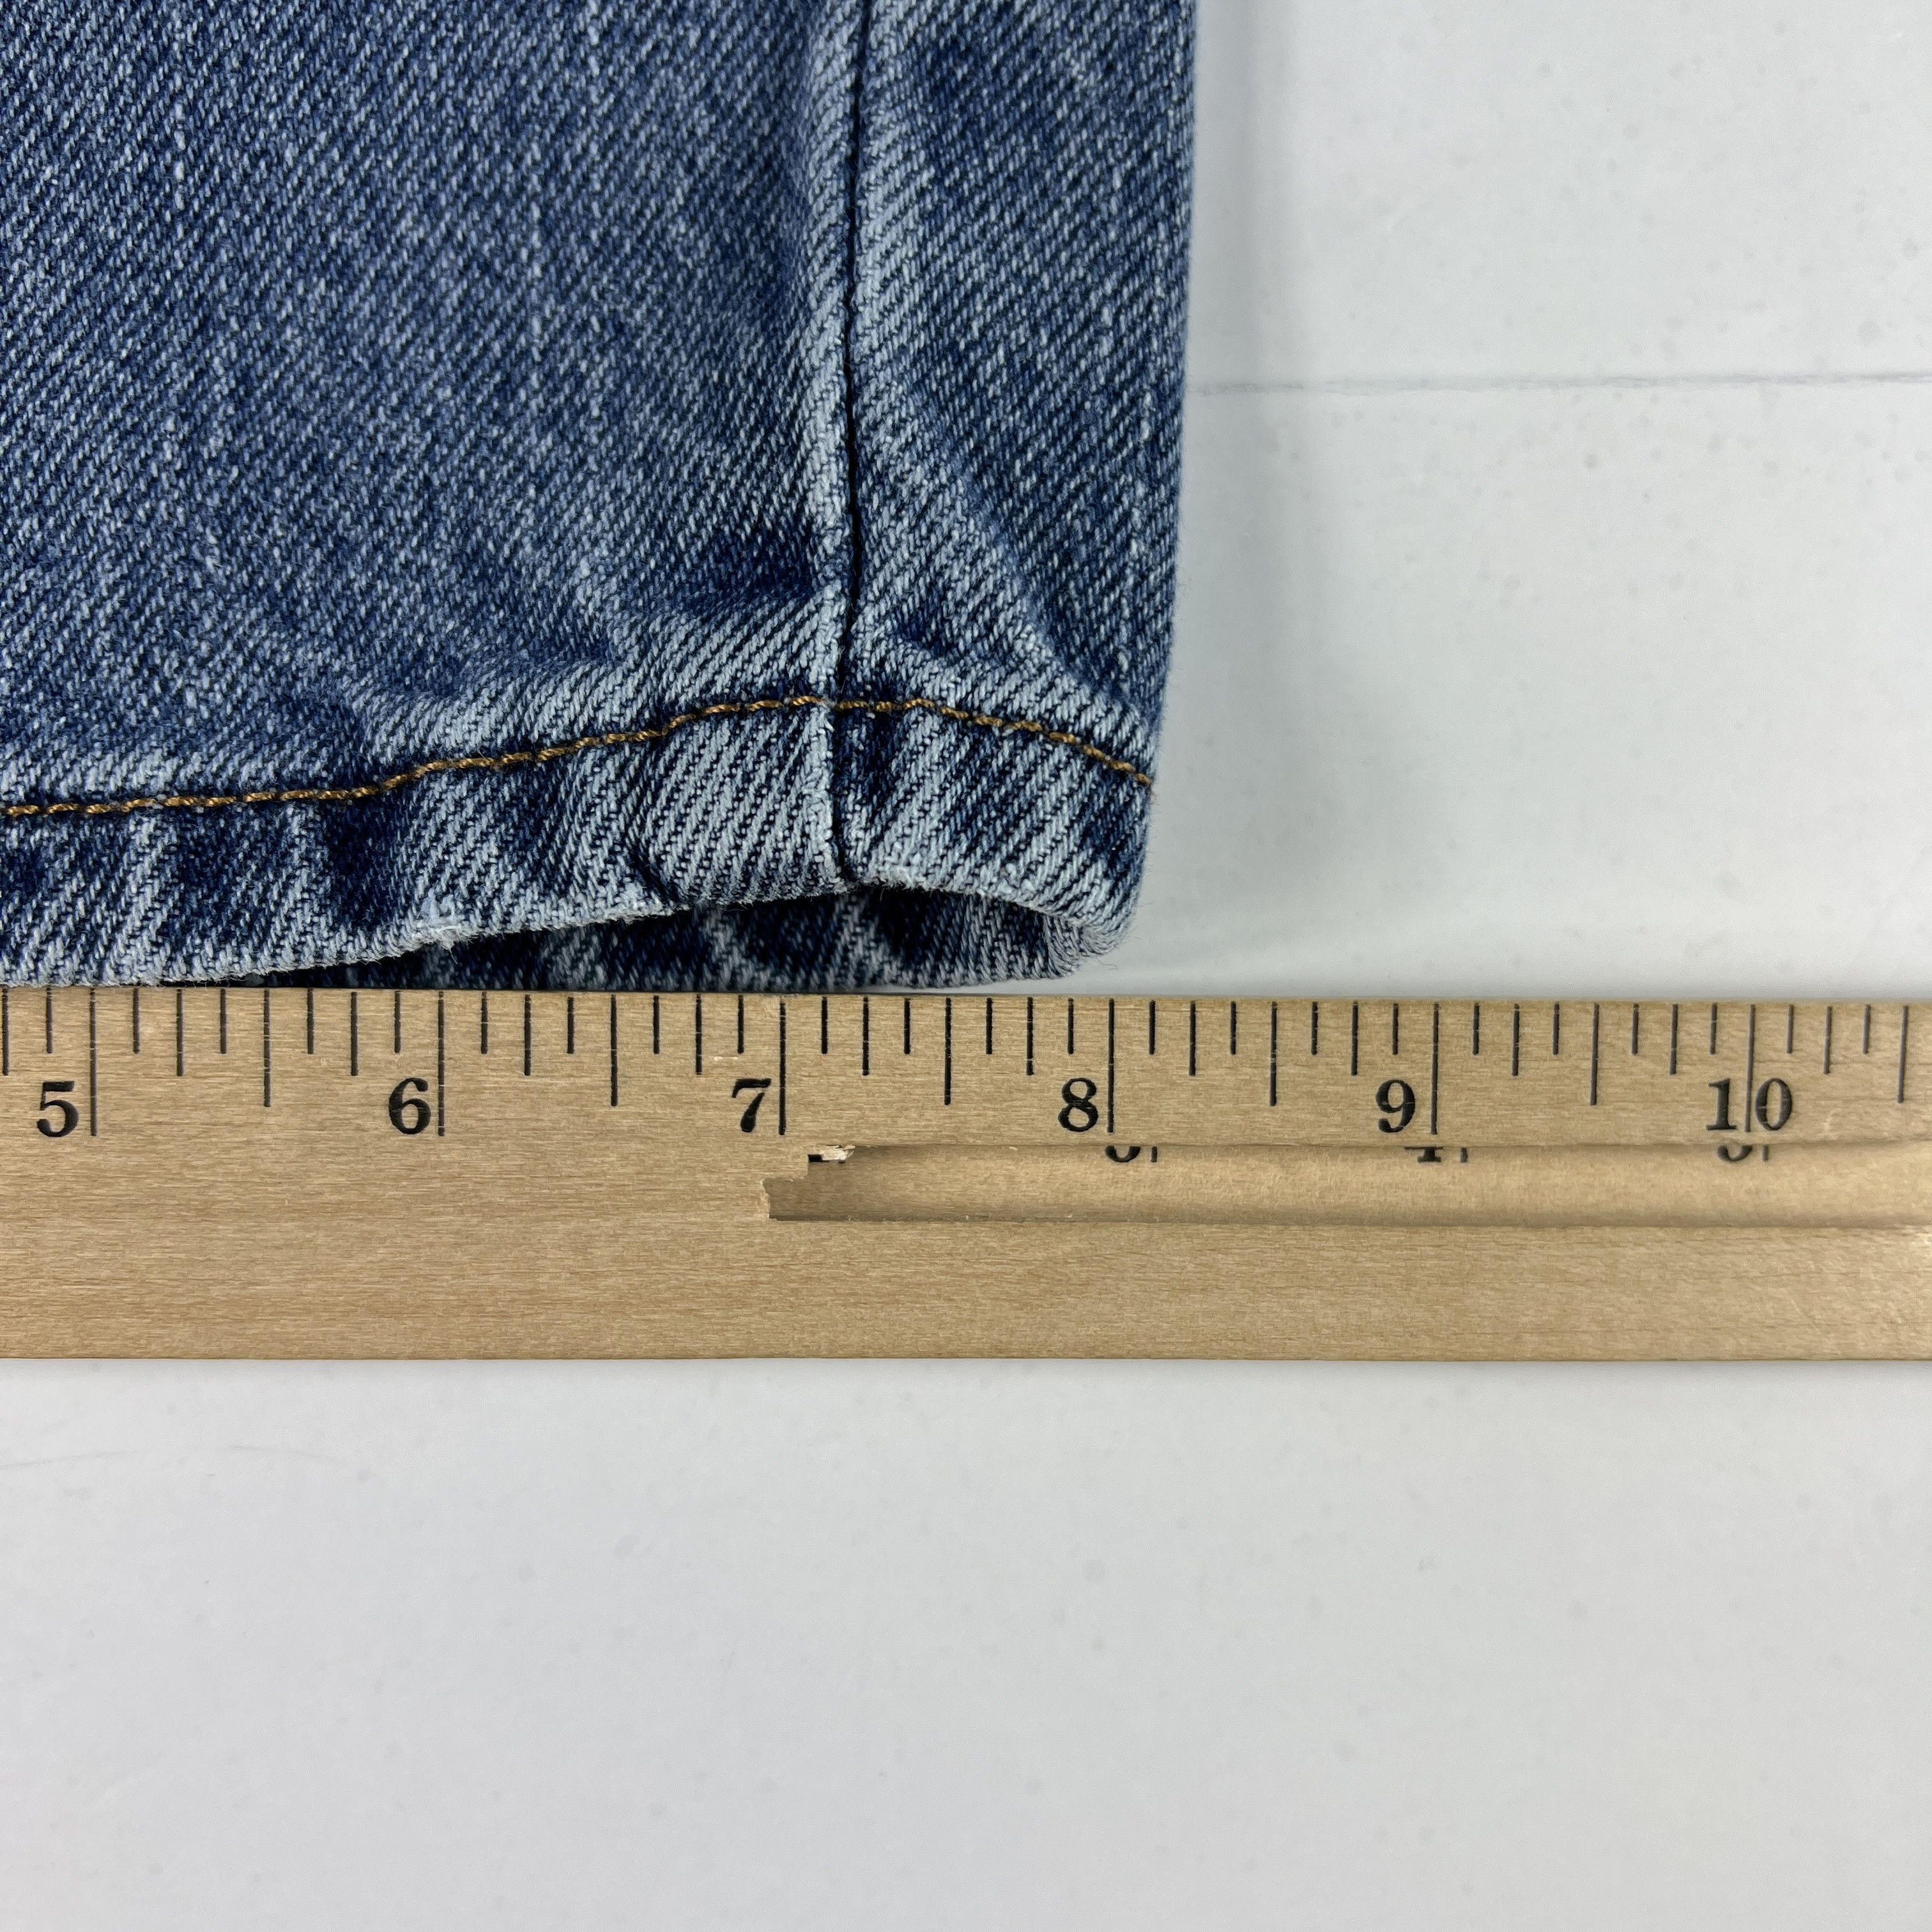 Levi's Y2K Levi's Jean 550 Relaxed Straight Blue Faded Cotton Denim Size US 34 / EU 50 - 16 Thumbnail